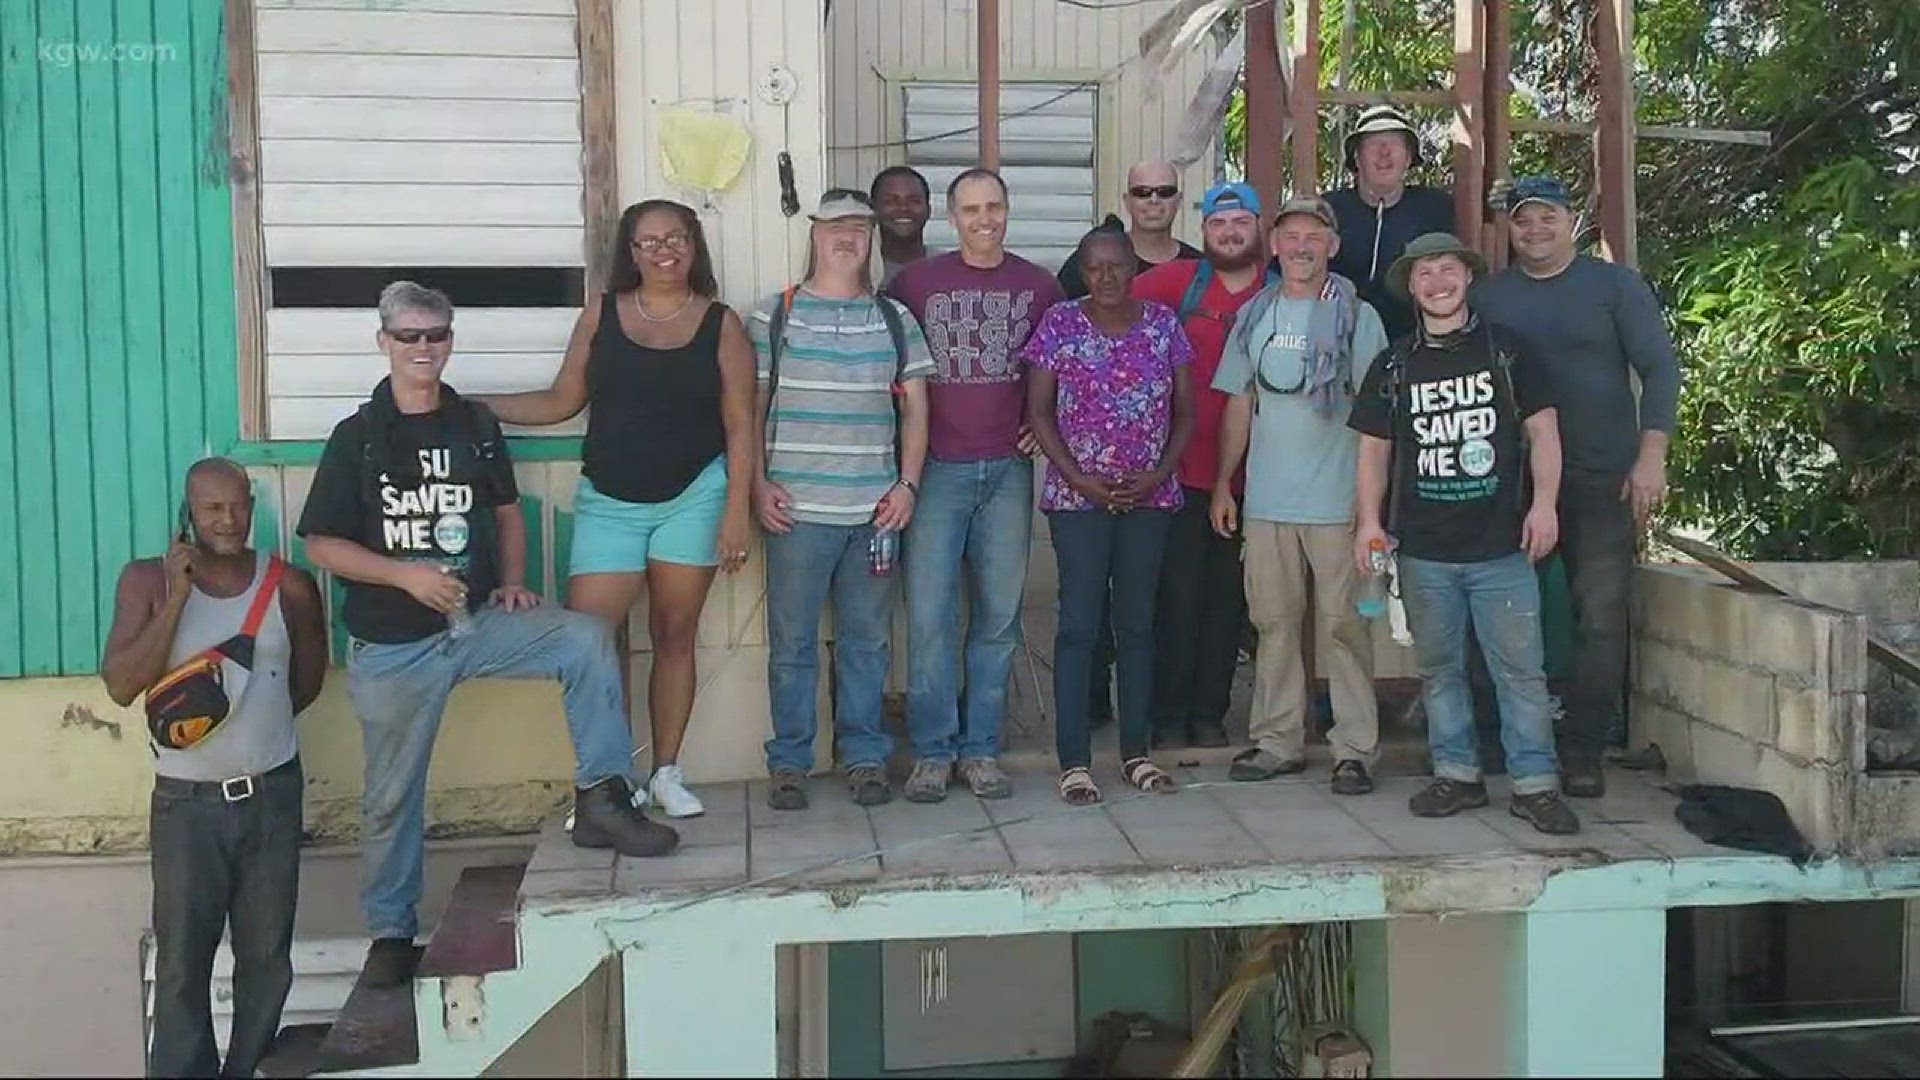 It's been more than two months since Hurricane Maria slammed into Puerto Rico, and residents there are still trying to get back on their feet. A local group from Calvary Chapel in Hillsboro and Beaverton just returned from the island.